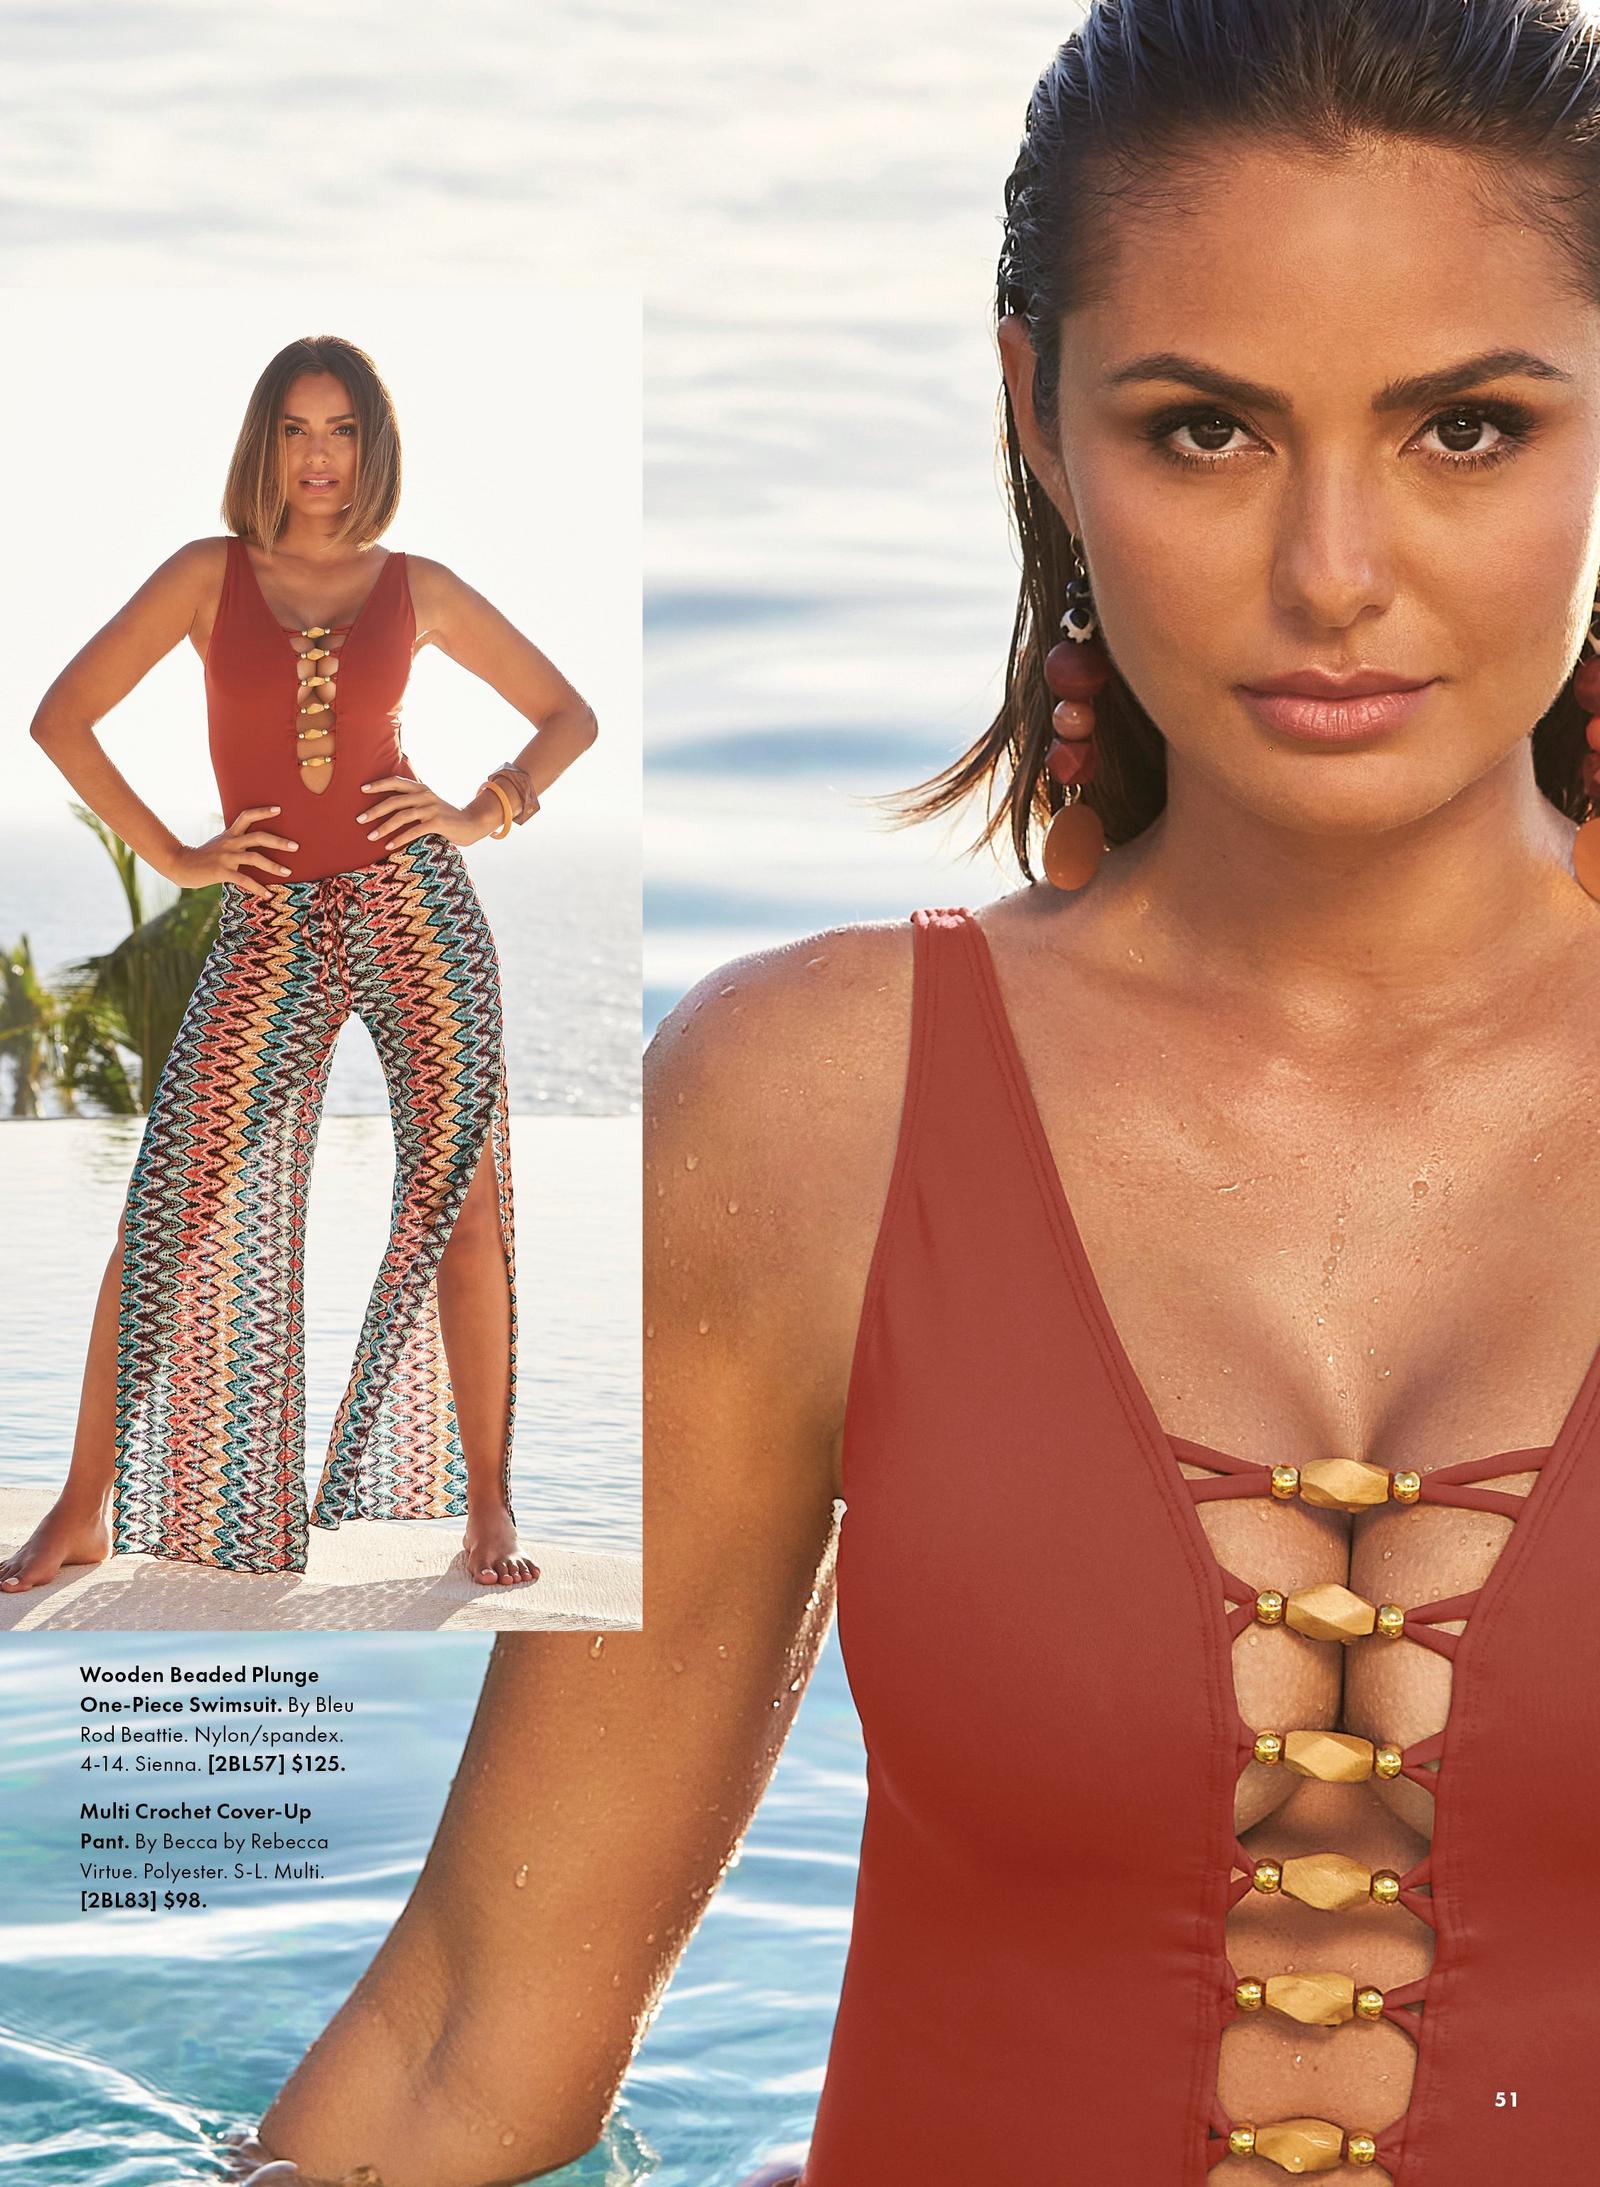 model wearing a sienna one-piece wooden beaded plunge swimsuit and multicolored crochet cover up pants.